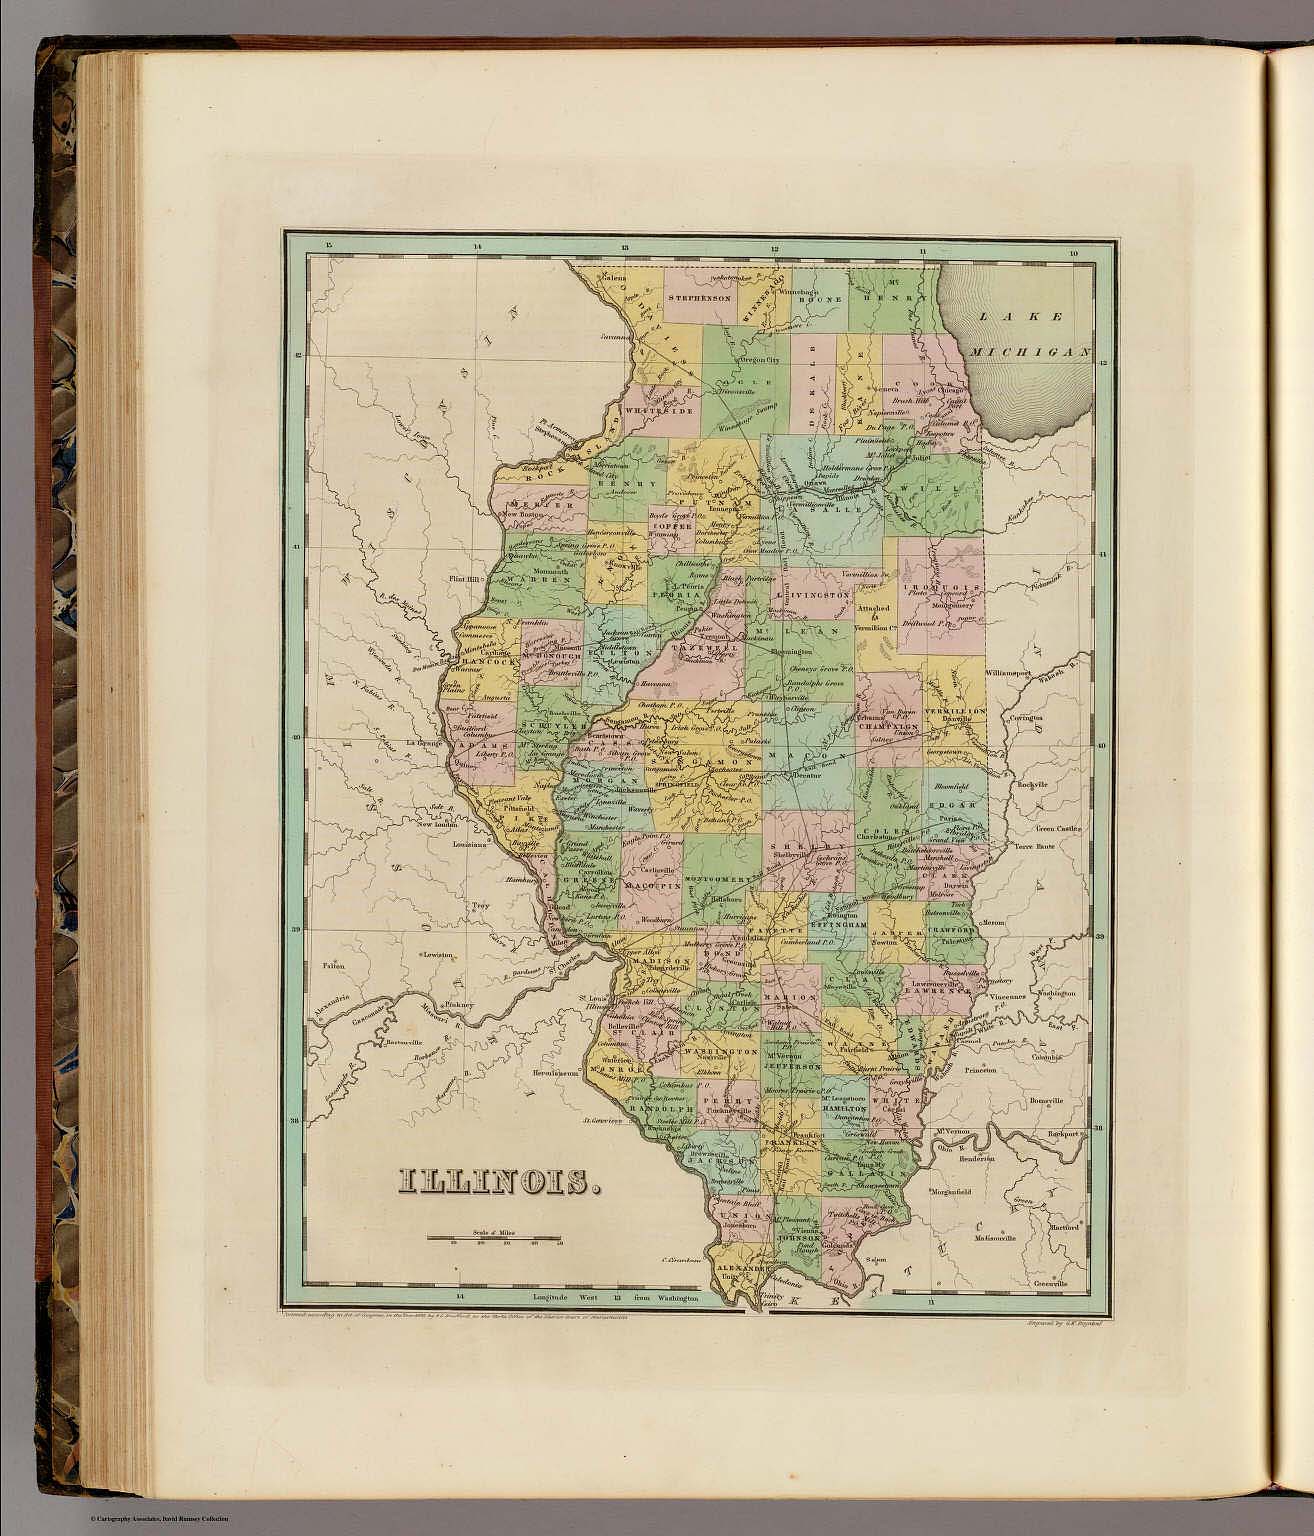 Illinois David Rumsey Historical Map Collection 1951